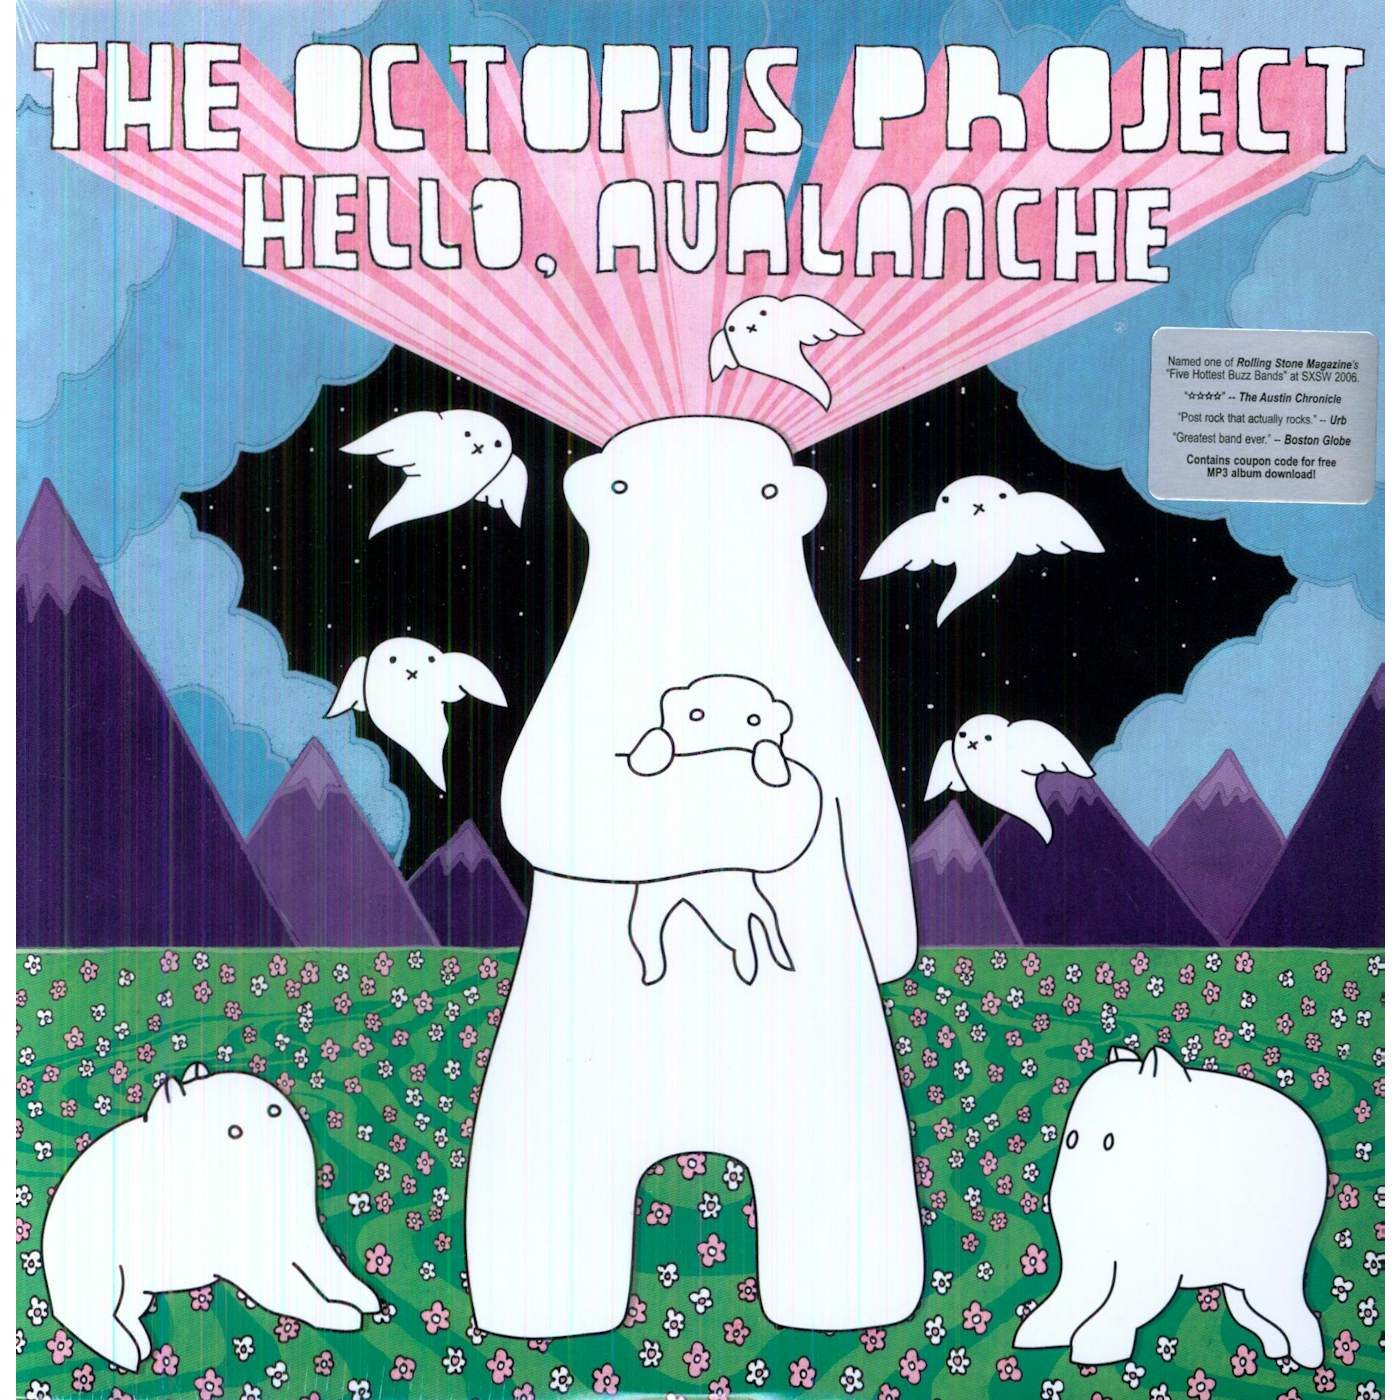 The Octopus Project HELLO AVALANCHE Vinyl Record